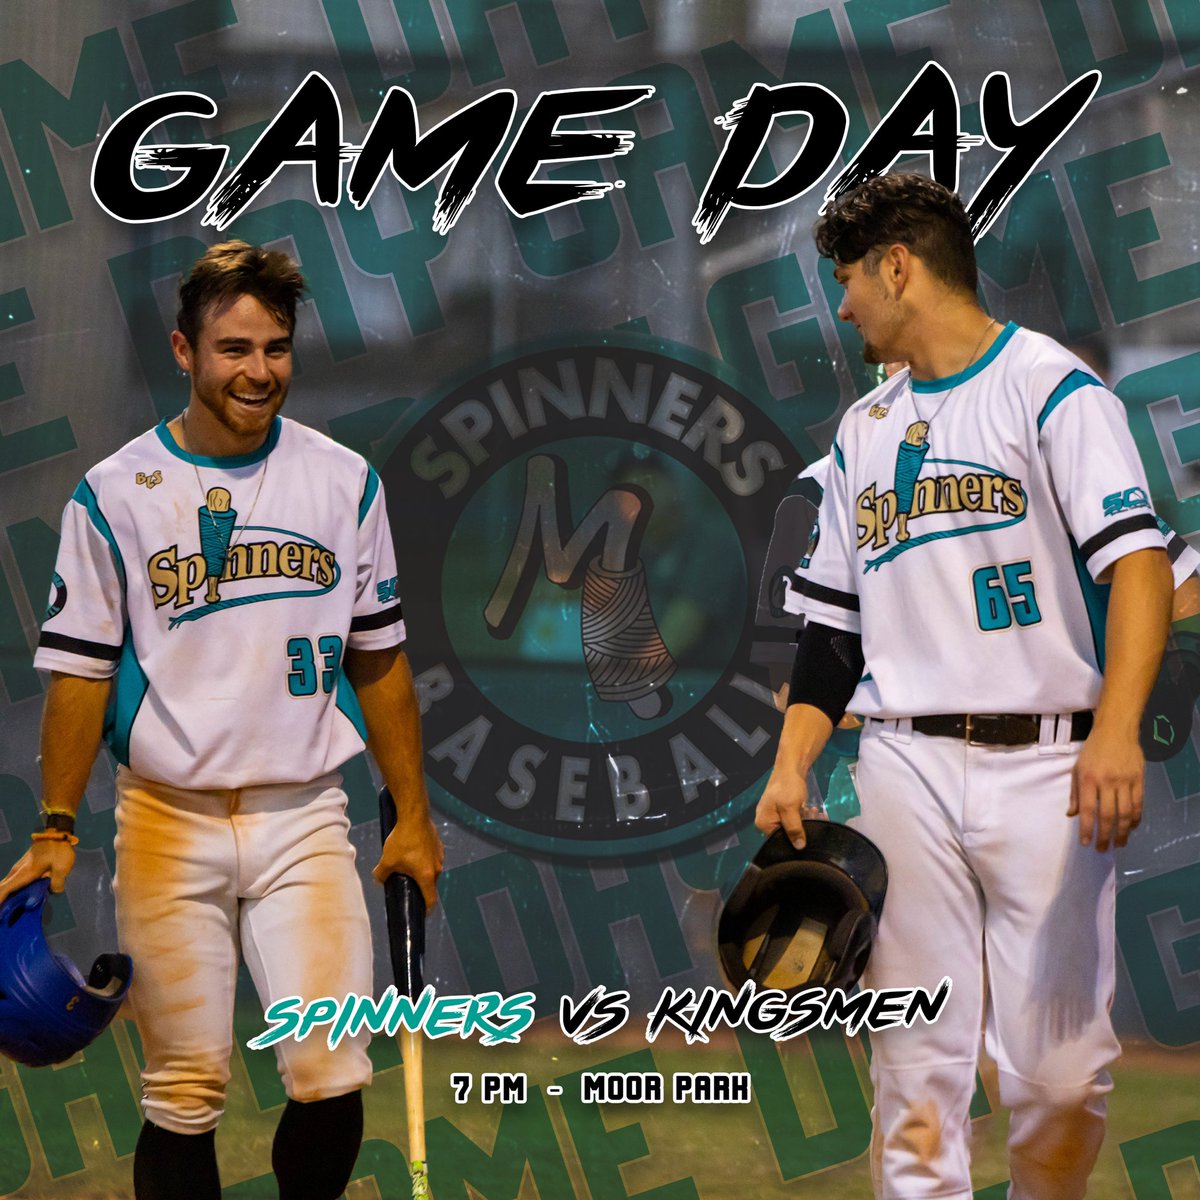 Game day against Kingsmen! Come out and spend your Saturday evening with us at Moor Park! Gates open at 5, game starts at 7, and admission is $6!